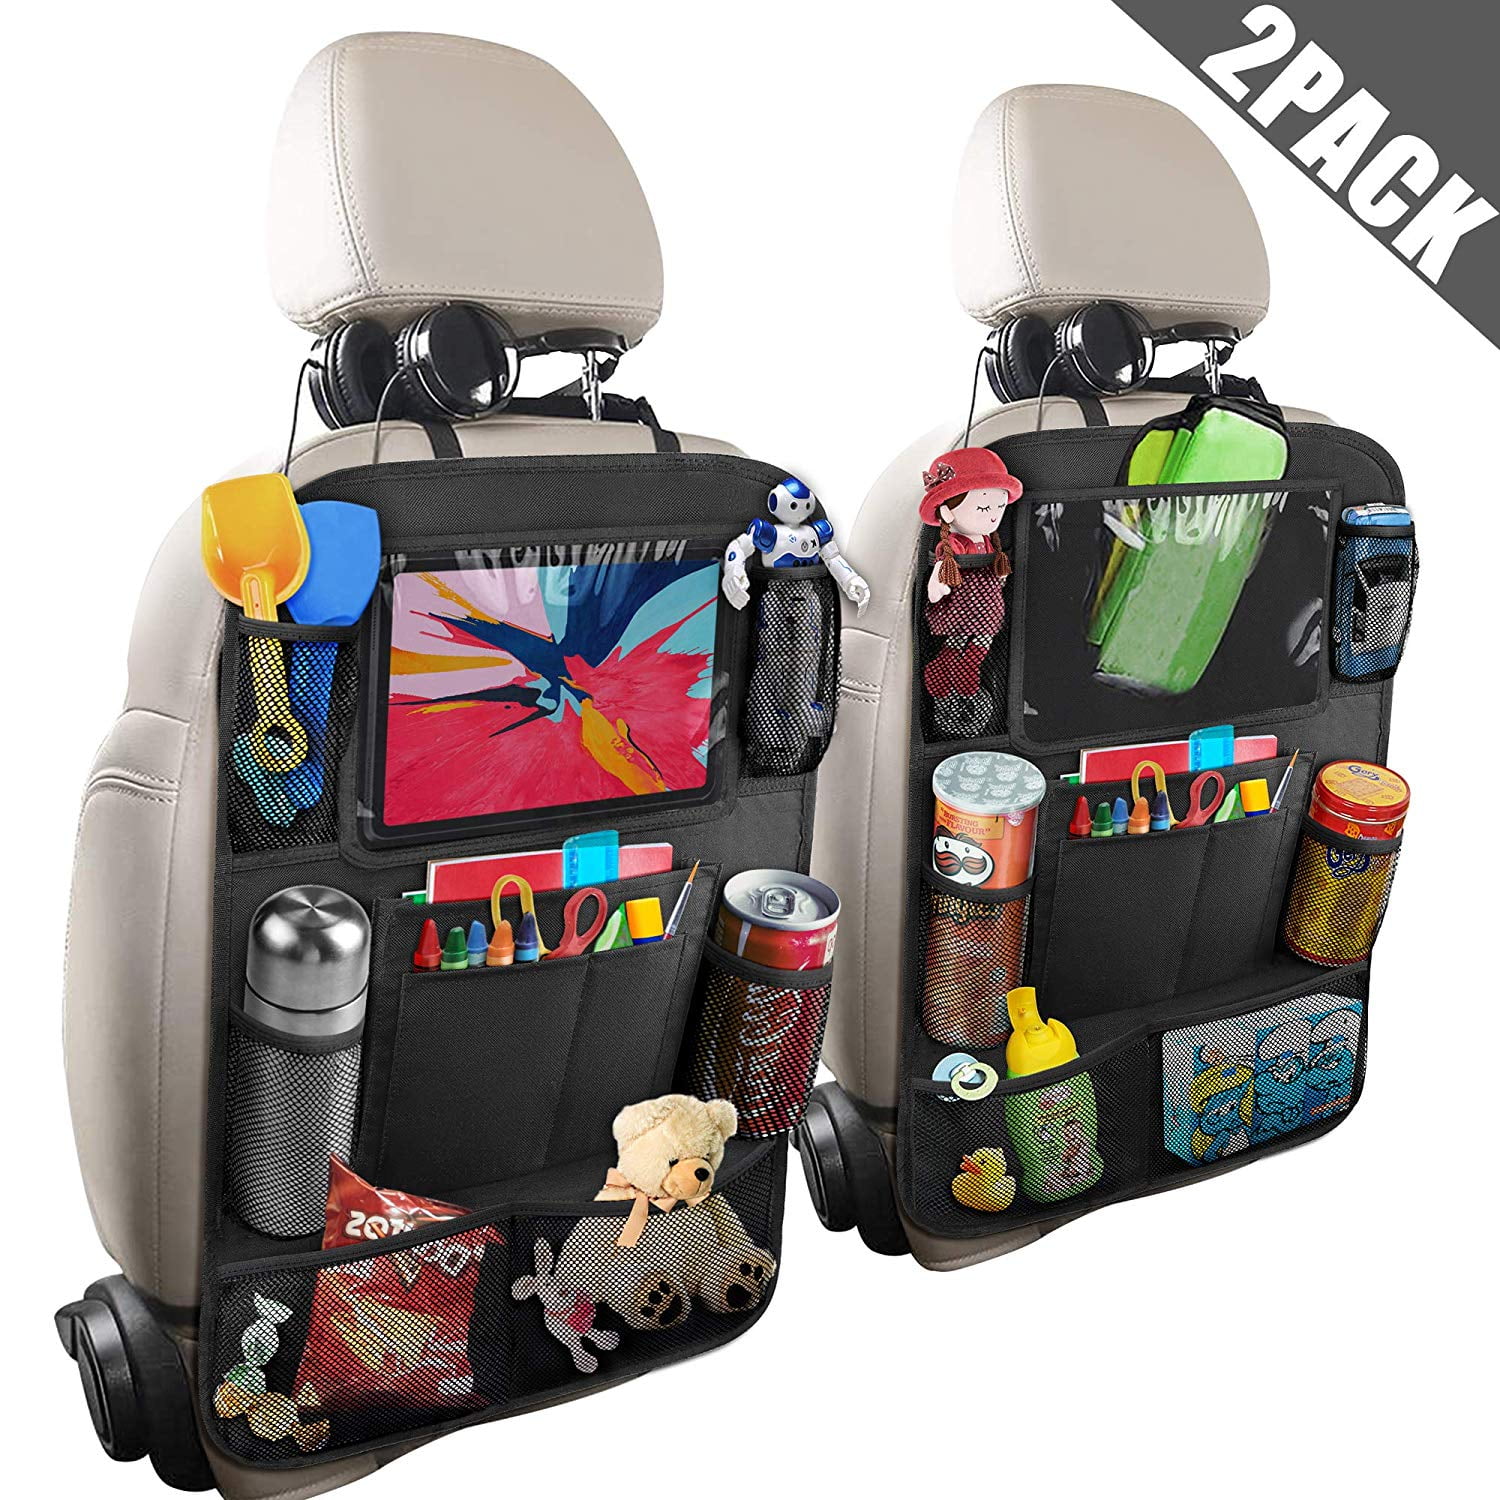 Storage Pockets for Travel/Business,Car Accessories for Stuff Back Seat Protectors fit Car/Truck/SUVs Waterproof Kick Mats Car Backseat Organizer 2 Pack for Kids with Touch Screen Tablet Holder 